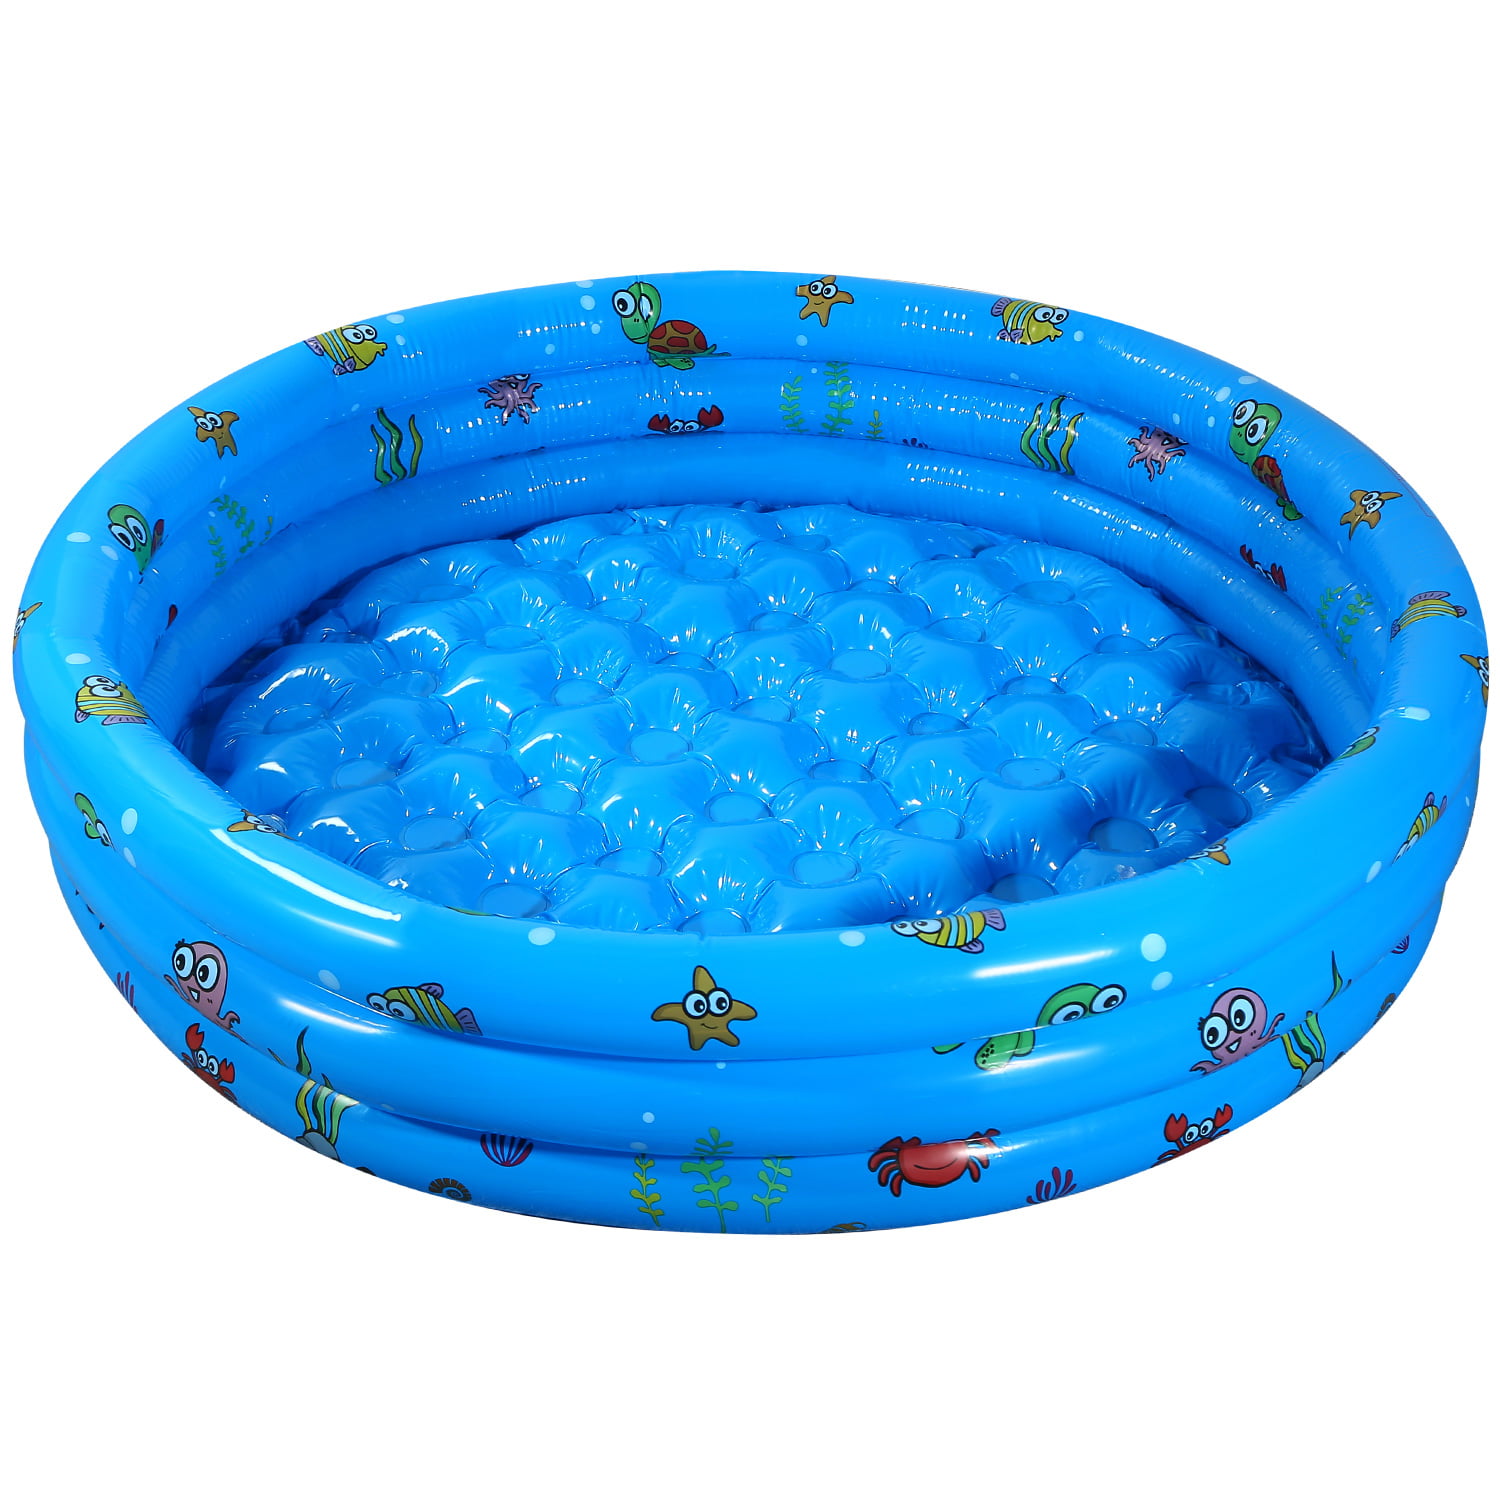 Sloosh Inflatable Kiddie Pool Blue with Geometric Pattern Swimming Pool 3-Rings for Kids Indoor & Outdoor 34 Inches 